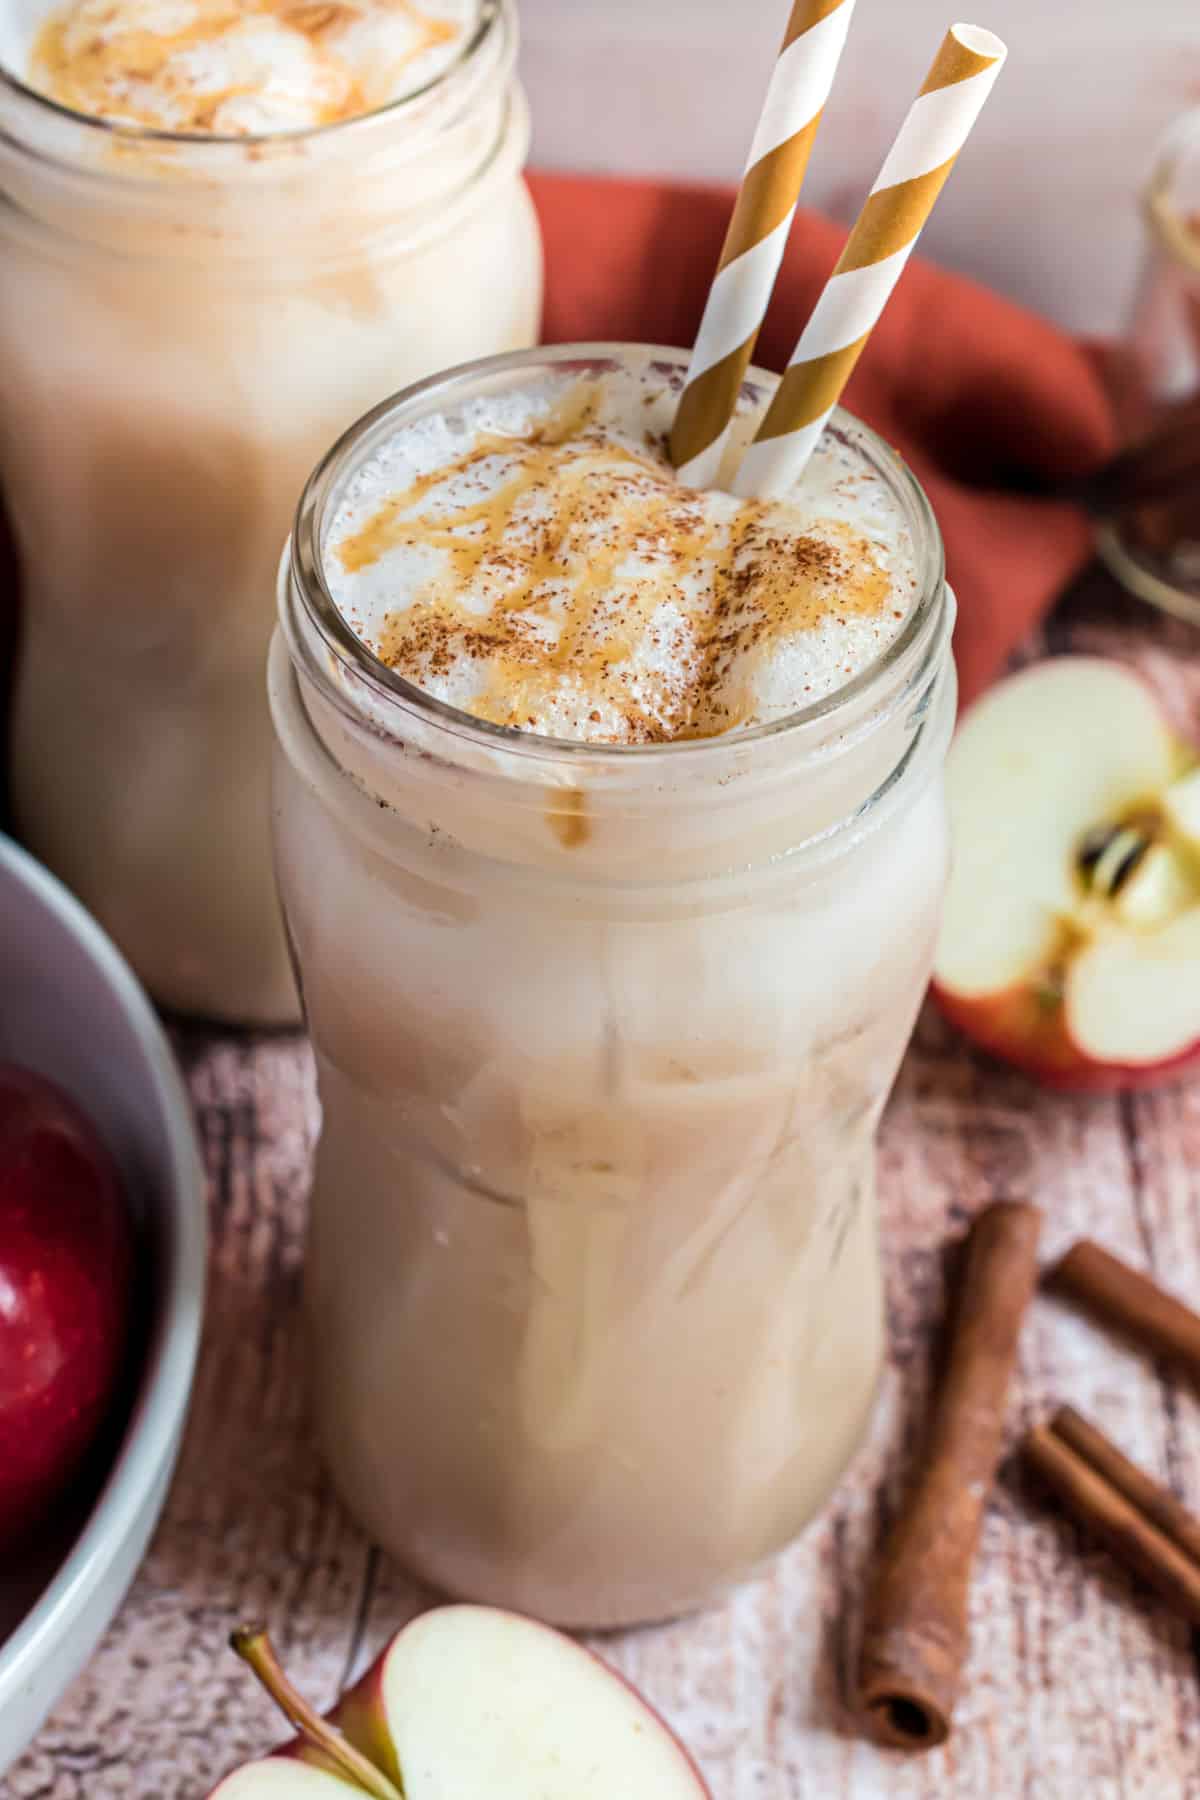 Apple crisp macchiato served over ice with a straw.